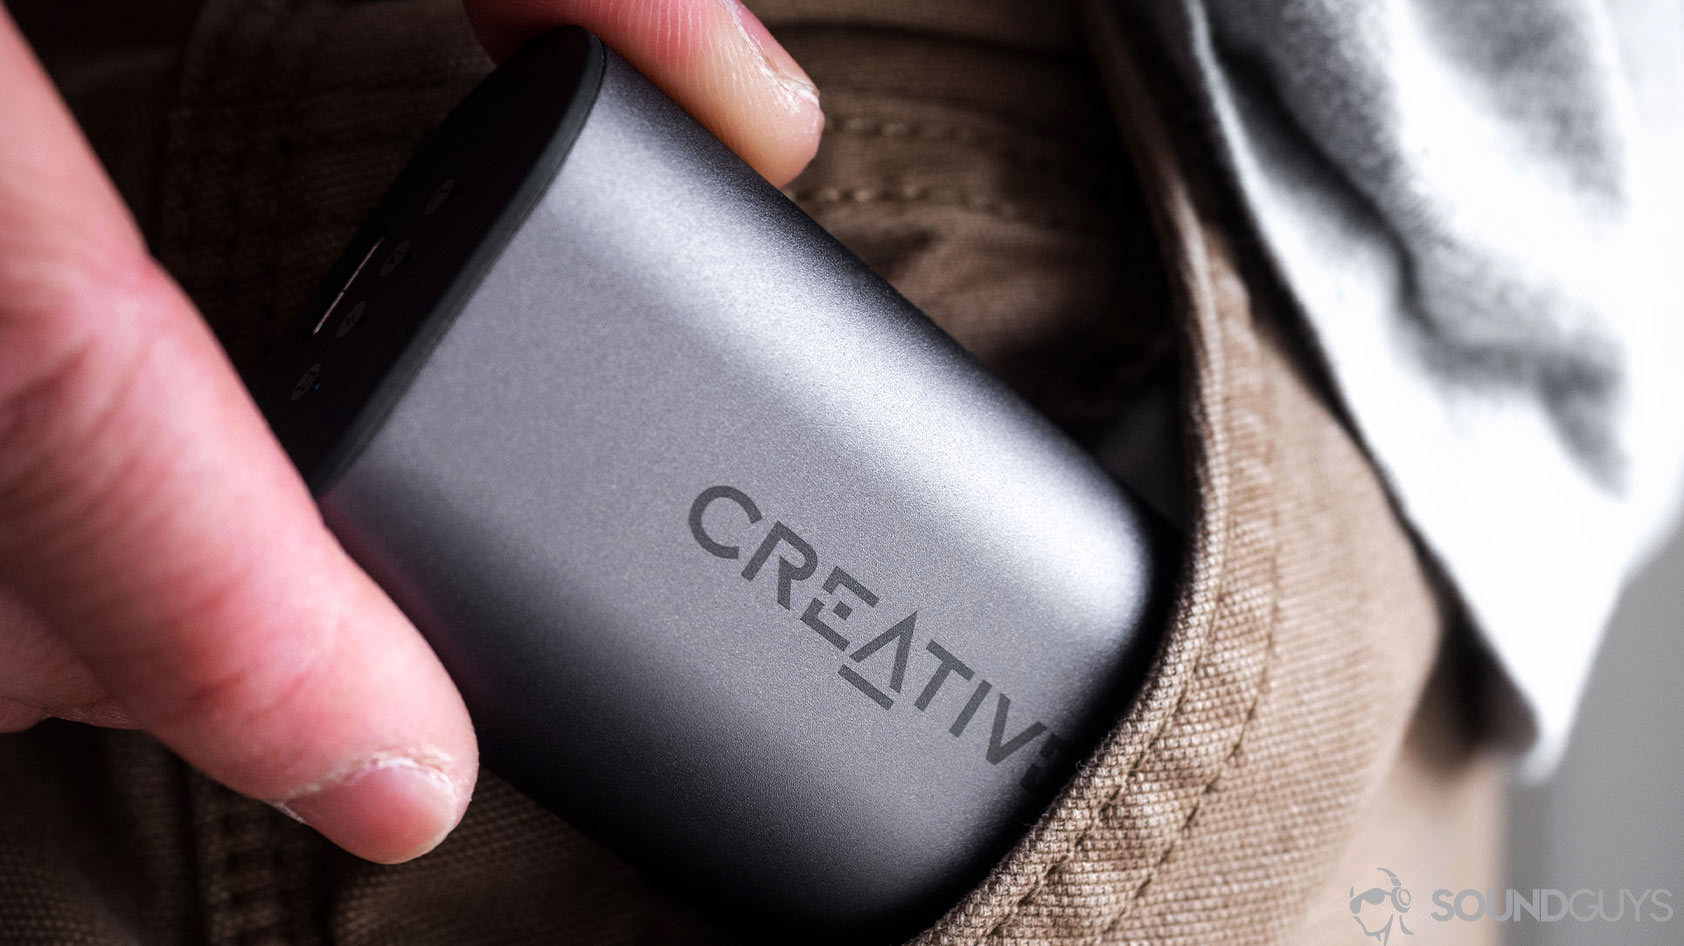 The Outlier Air charging case being inserted into a pocket.